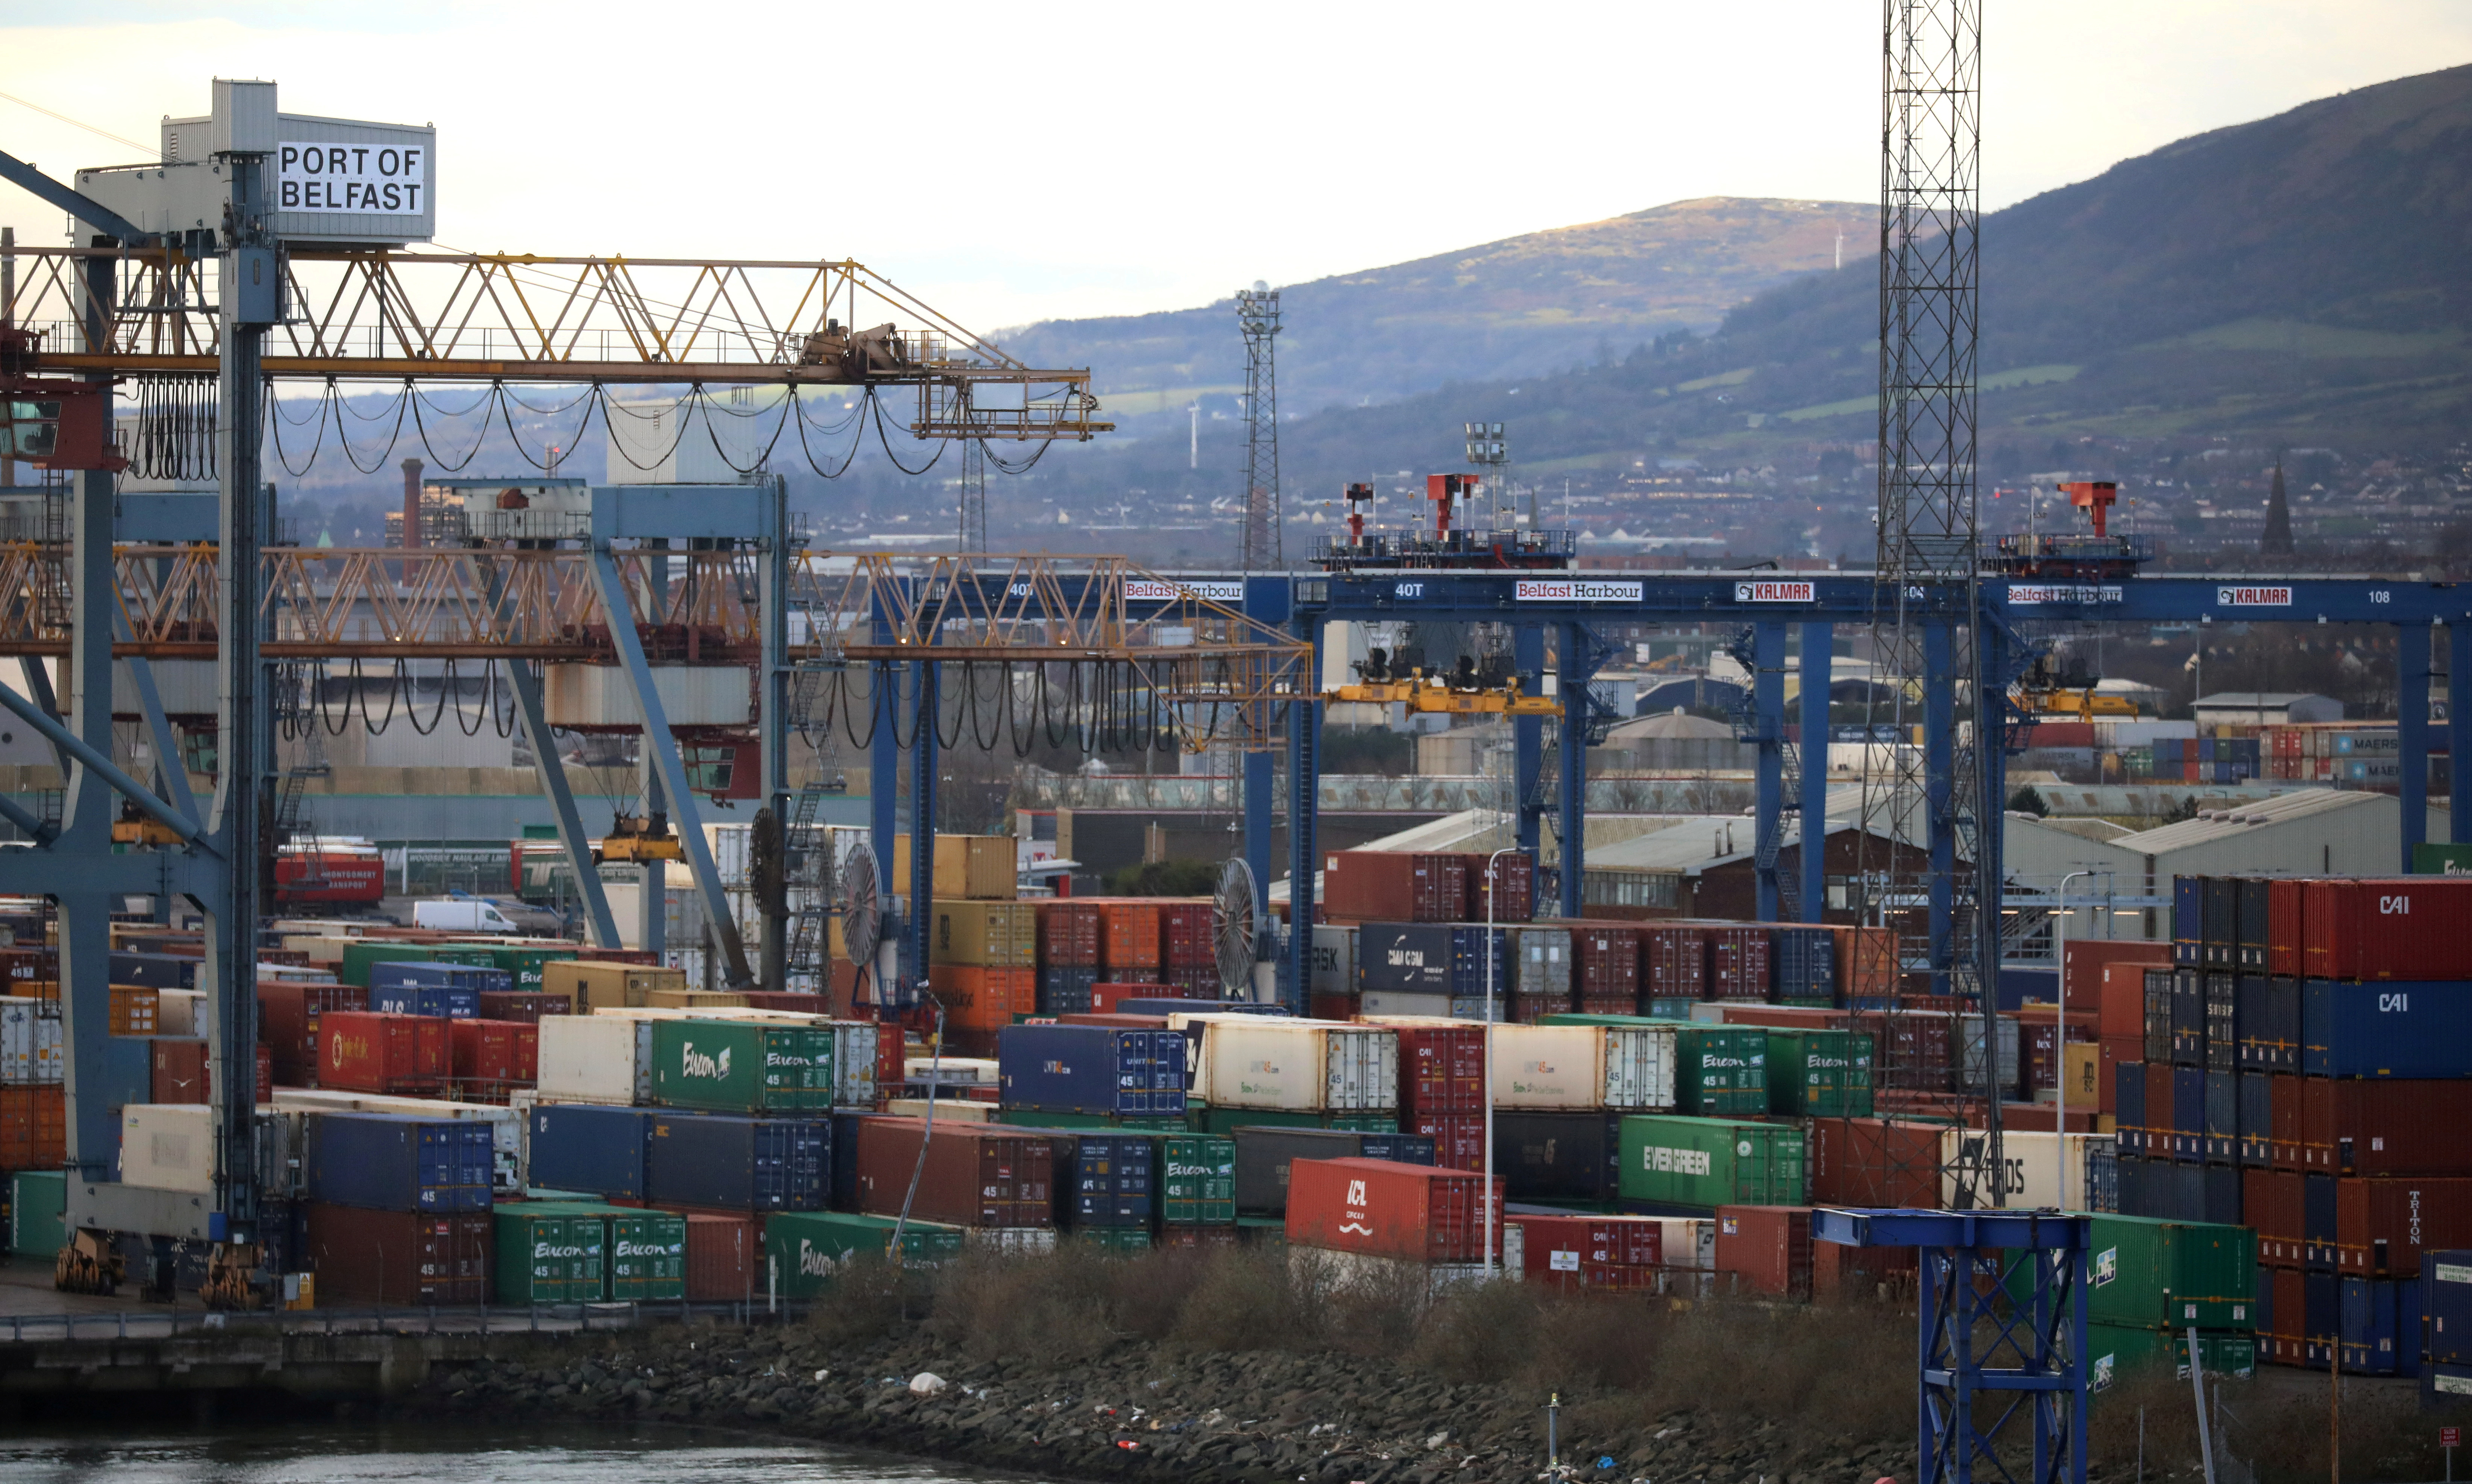 Shipping containers are seen at the Port of Belfast, Northern Ireland January 2, 2021. REUTERS/Phil Noble/File Photo